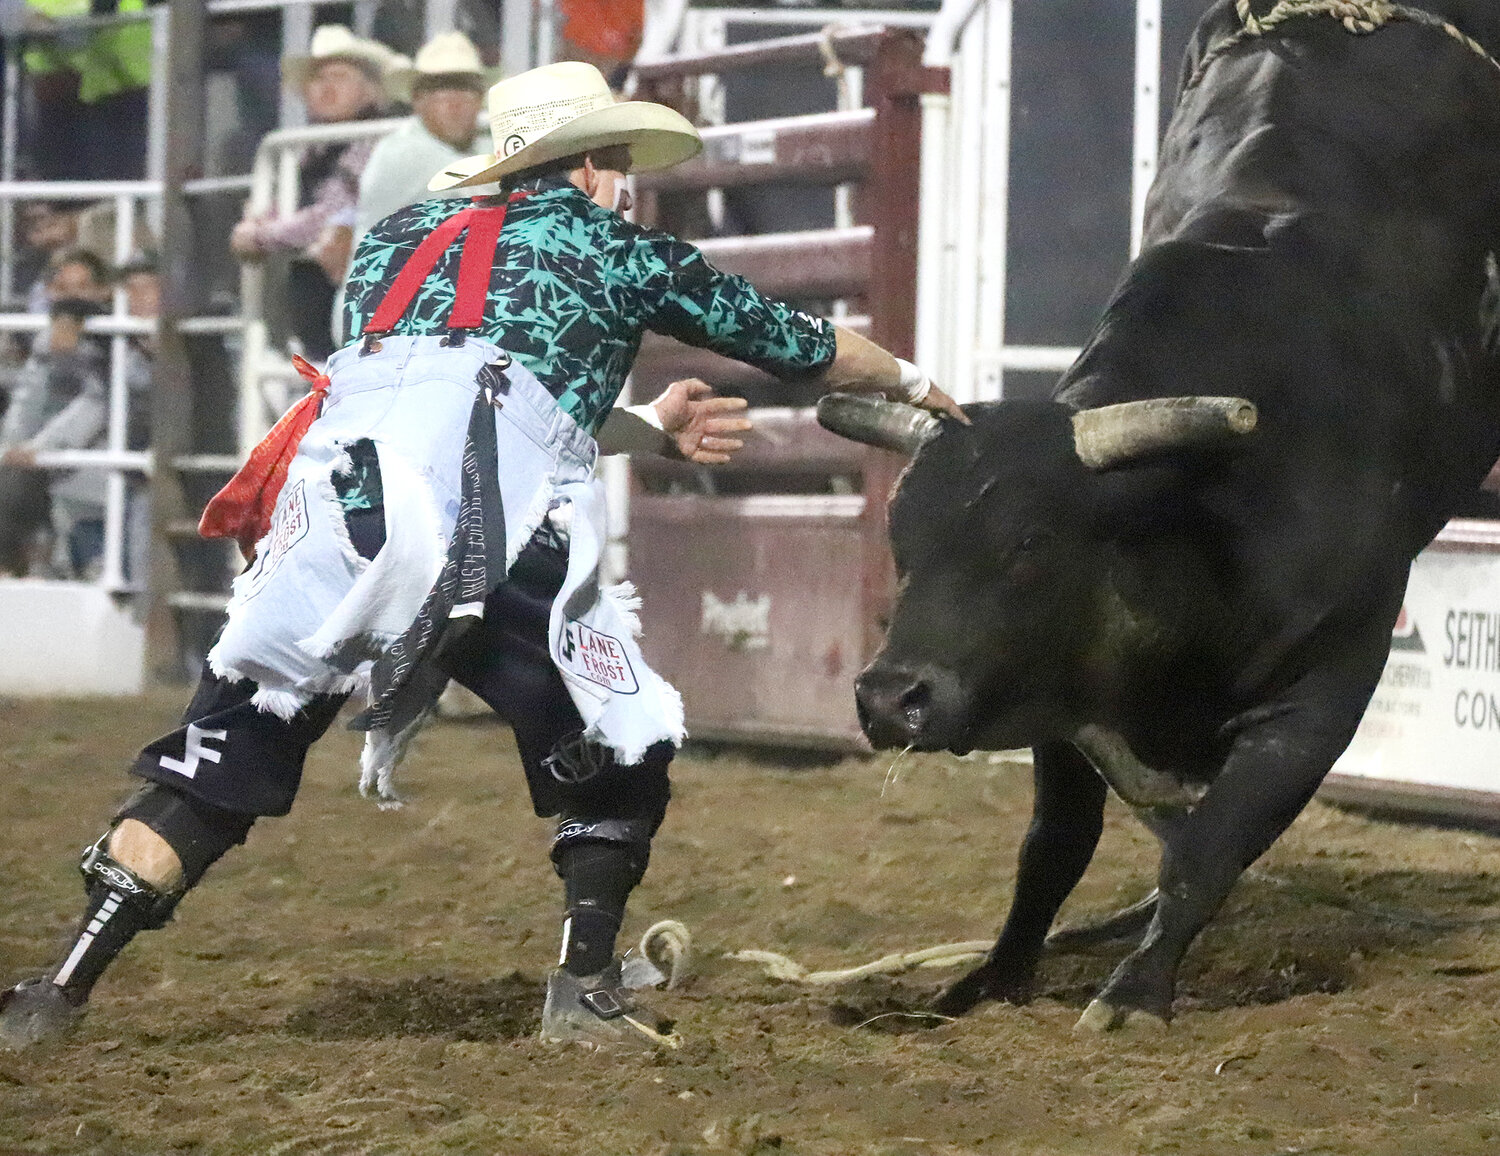 Rodeo Bullfighter Nathan Harp steps in to tangle with a ramped up bull during the bullfighting session of Wednesday's Jim Baier/Dodge Ram Chute-Out at the Tri-State Rodeo in Fort Madison.